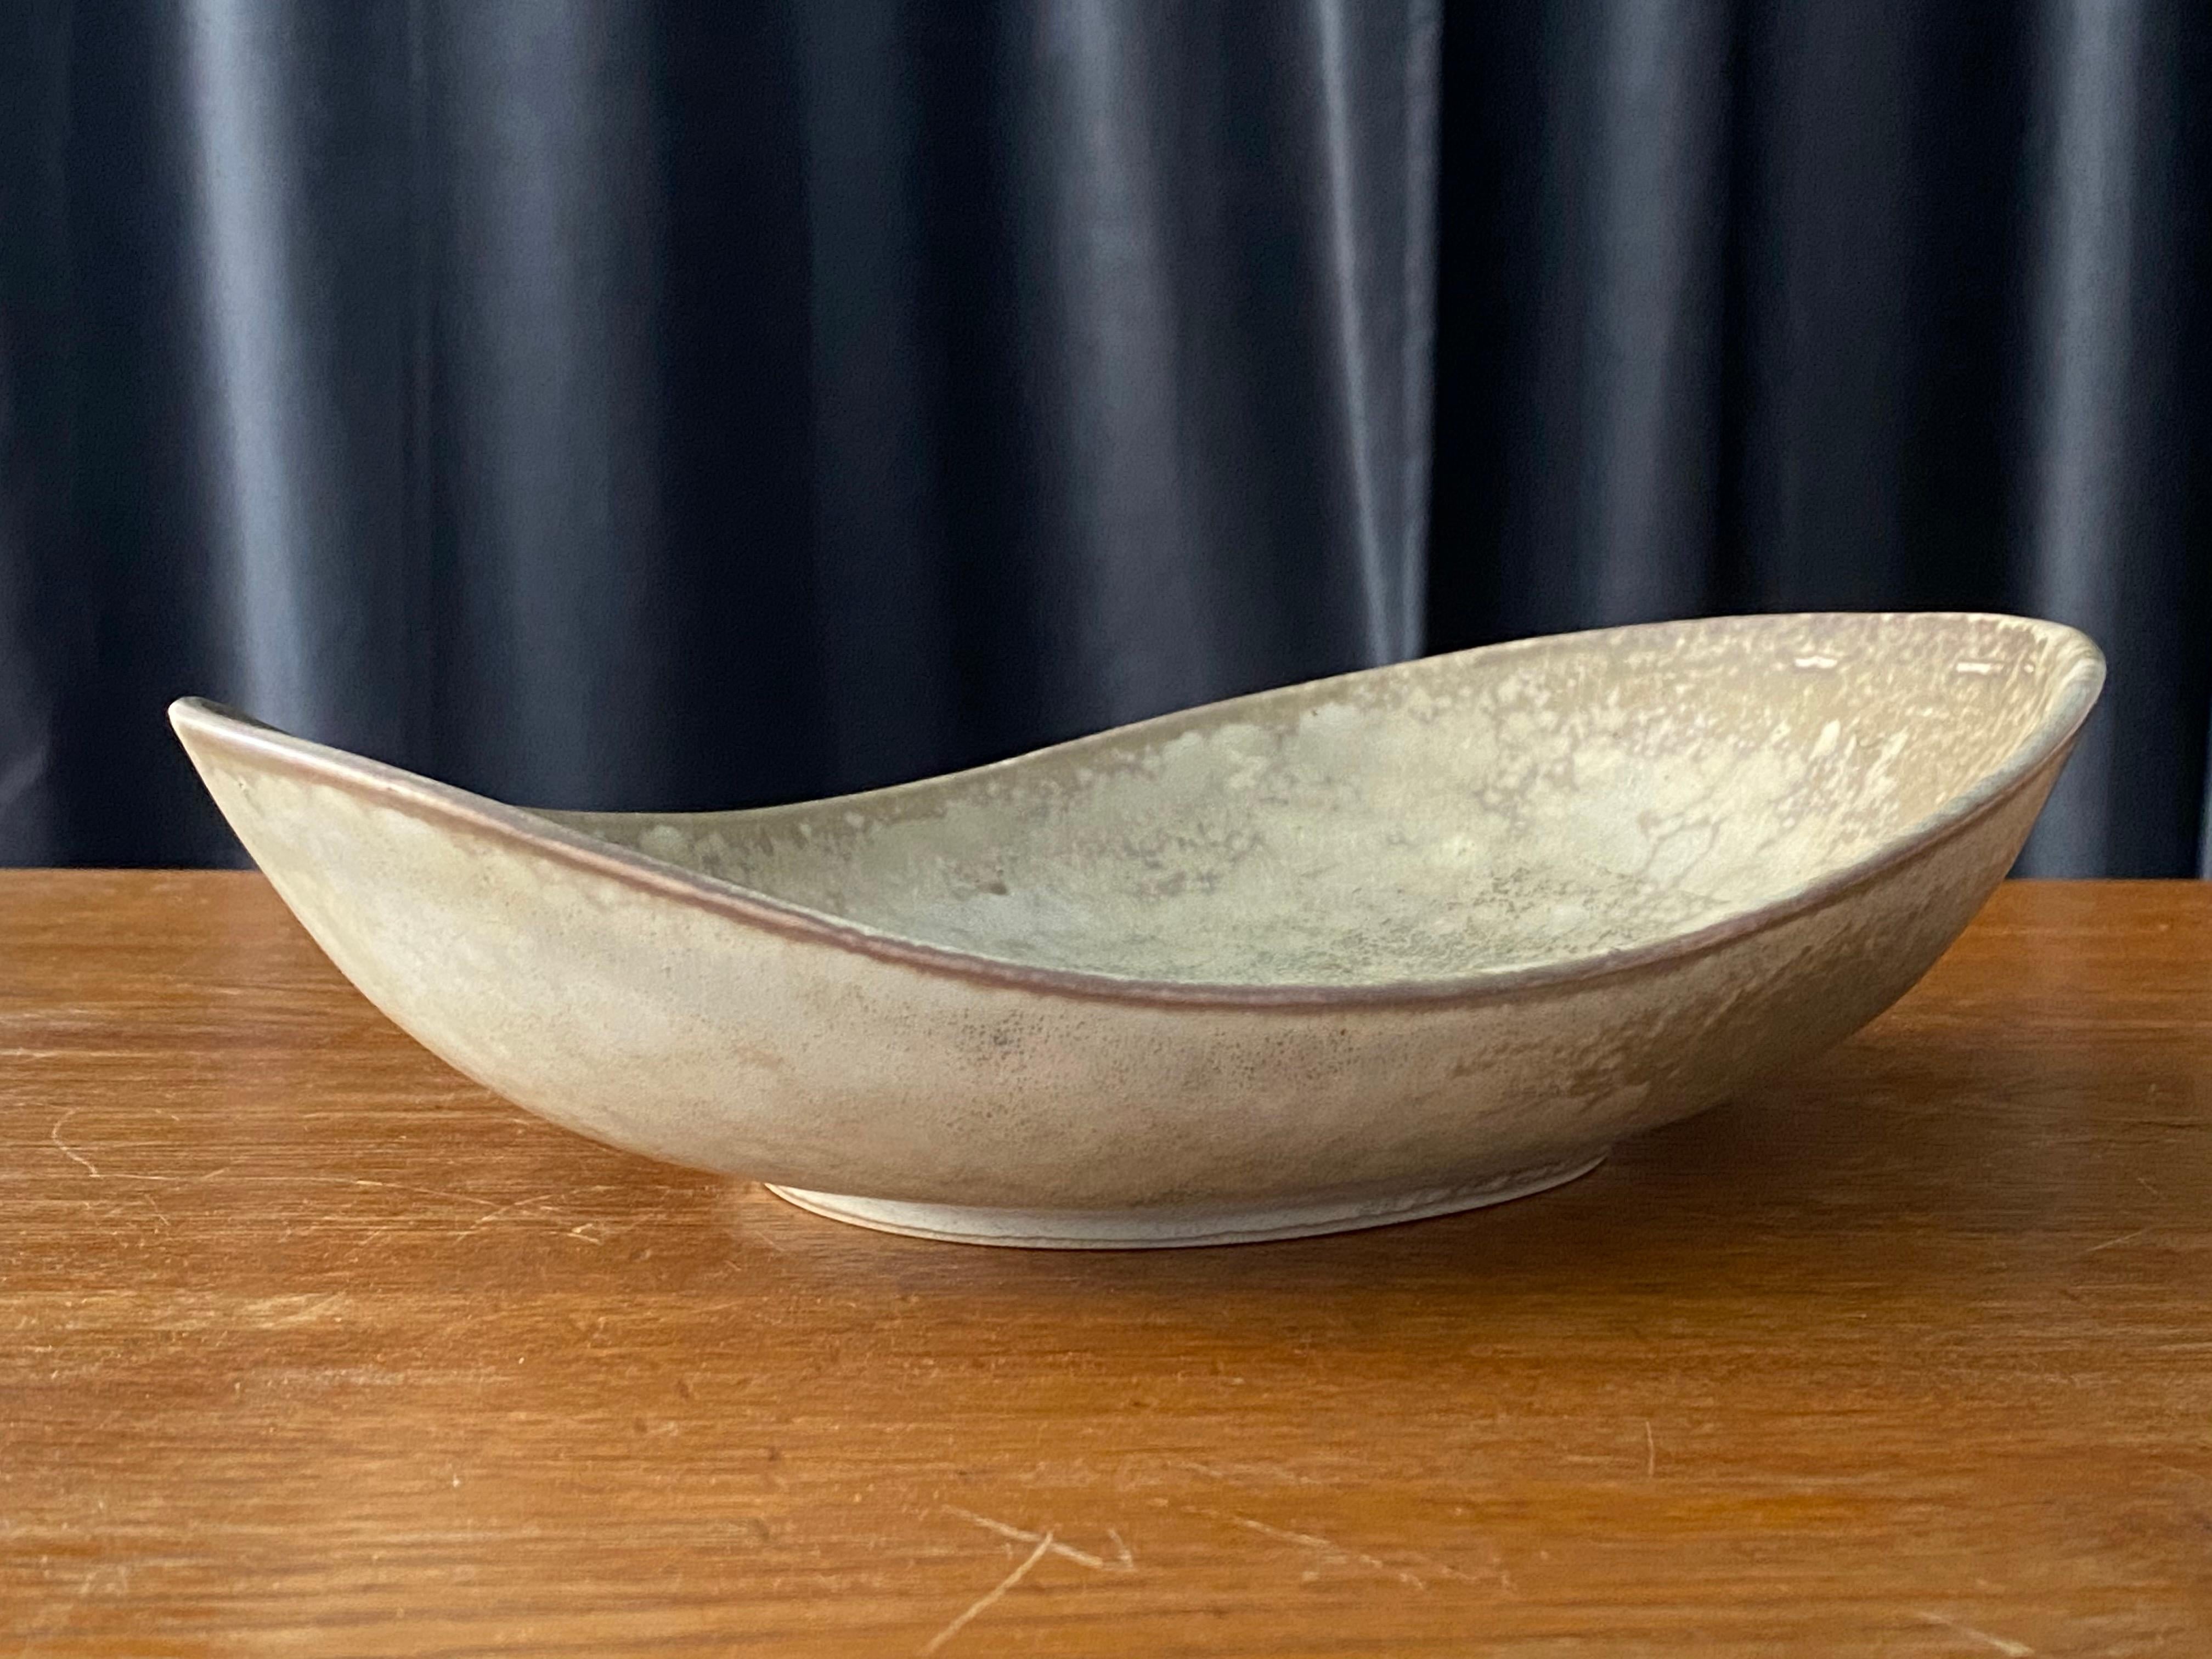 A rare and sizable bowl or dish by Carl-Harry Stålhane for the iconic Swedish firm Rörstrand. Of studio-level quality, 1950s, Sweden. Factory second. Marked and signed.

Other ceramicists of the period include Berndt Friberg, Axel Salto, Arne Bang